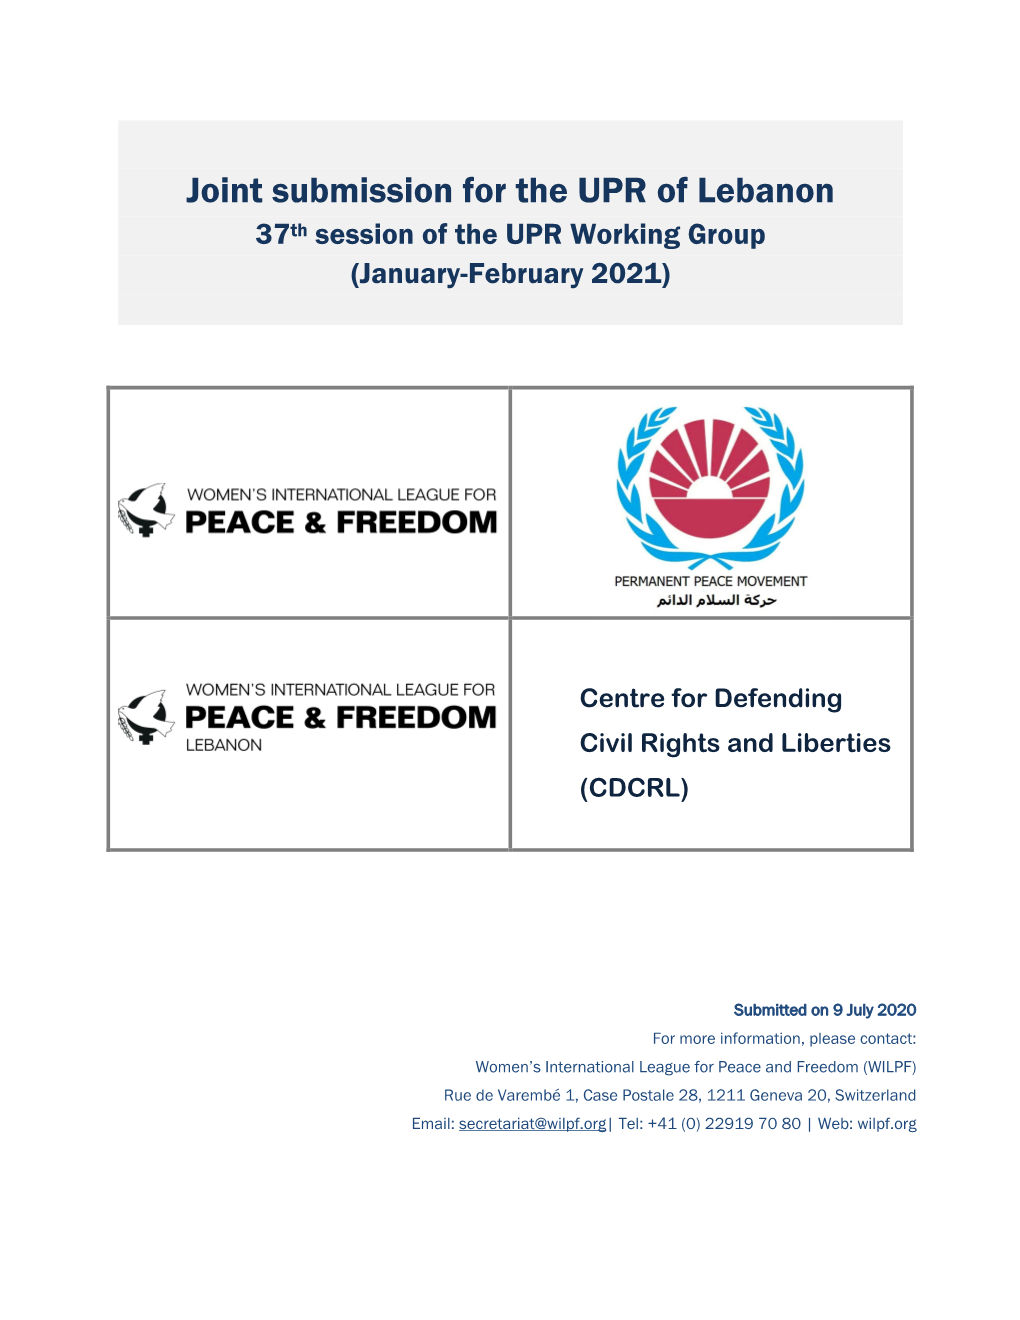 Joint Submission for the UPR of Lebanon 37Th Session of the UPR Working Group (January-February 2021)